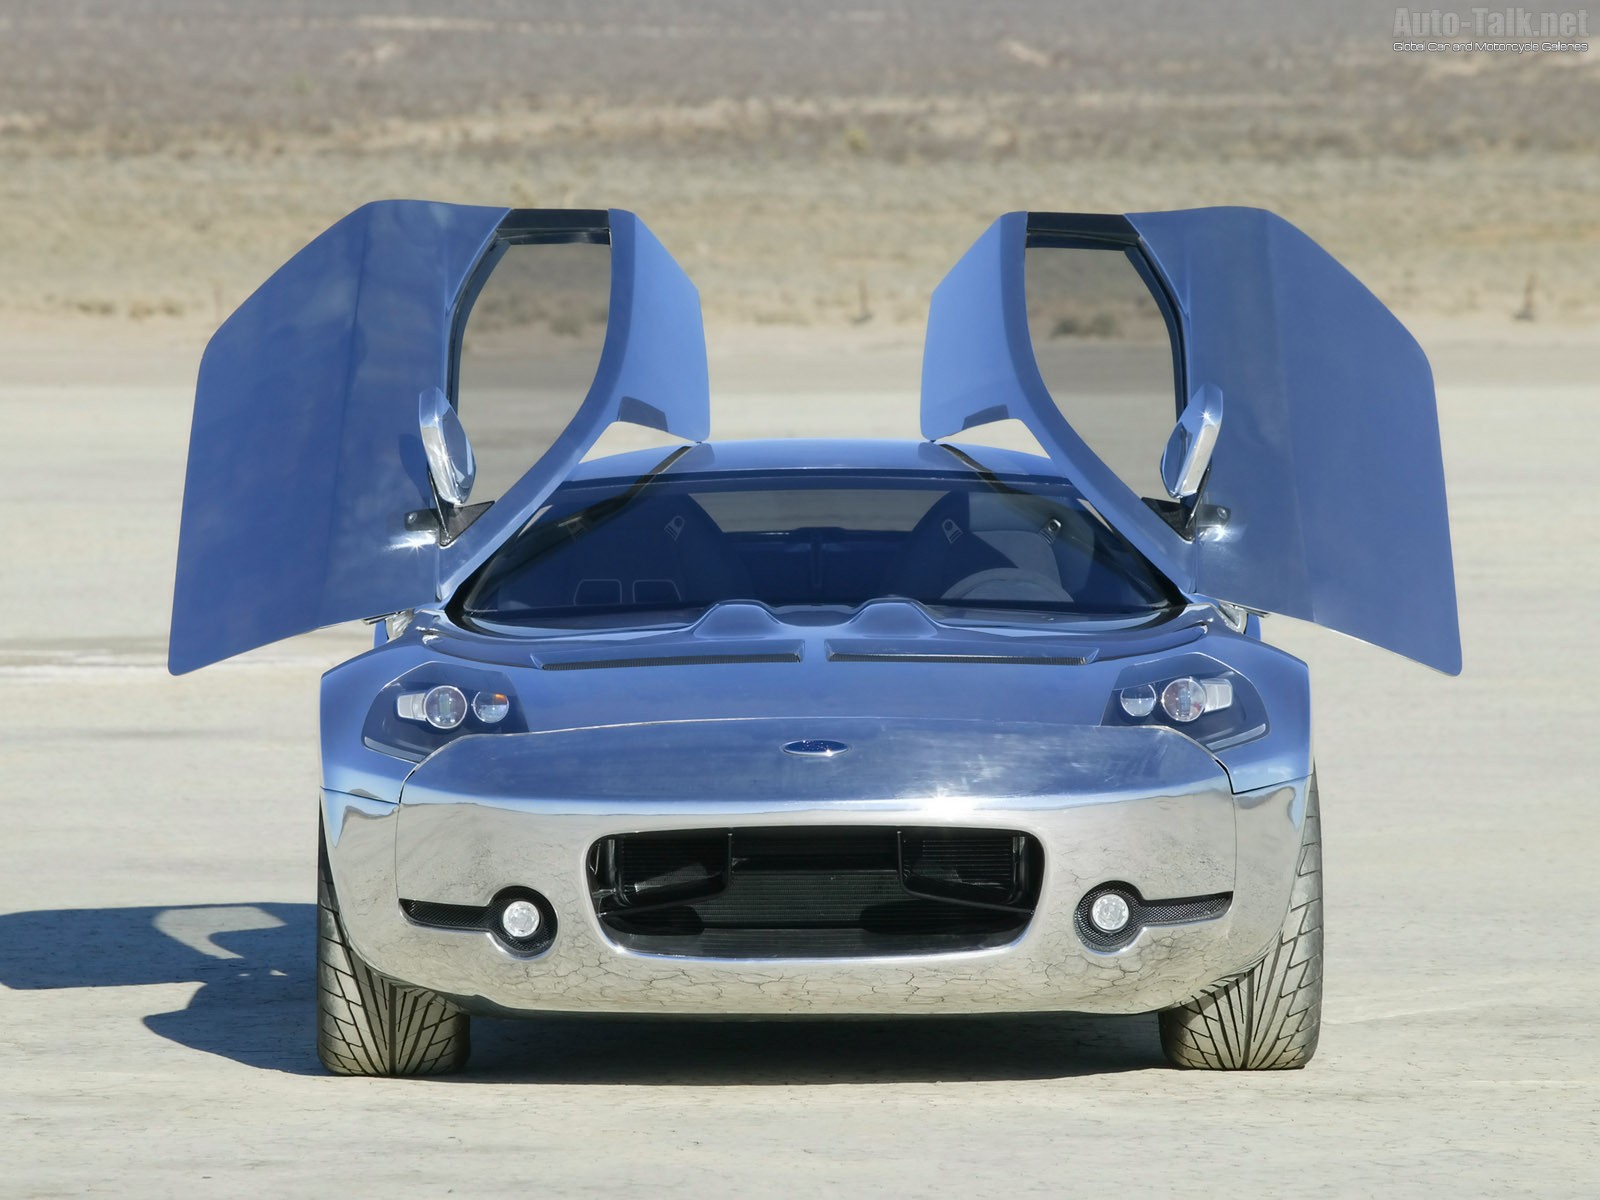 Open Doors - 2005 Ford Shelby GR-1 Concept Car